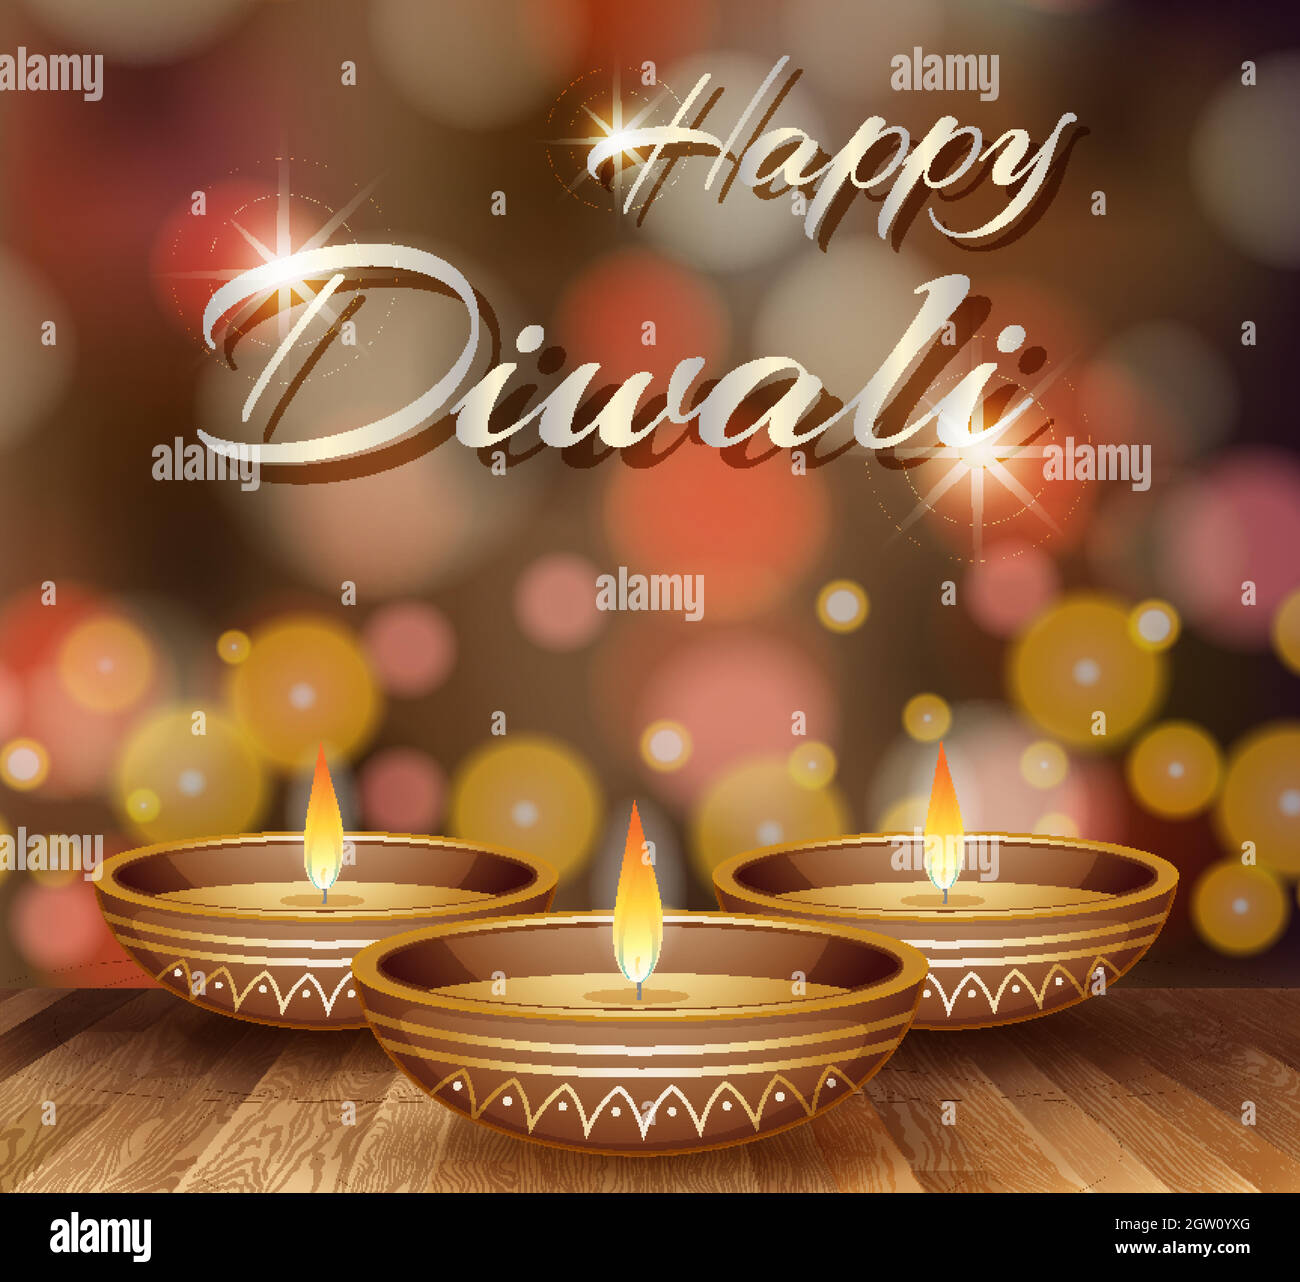 Happy Diwali background design with lights Stock Vector Image ...